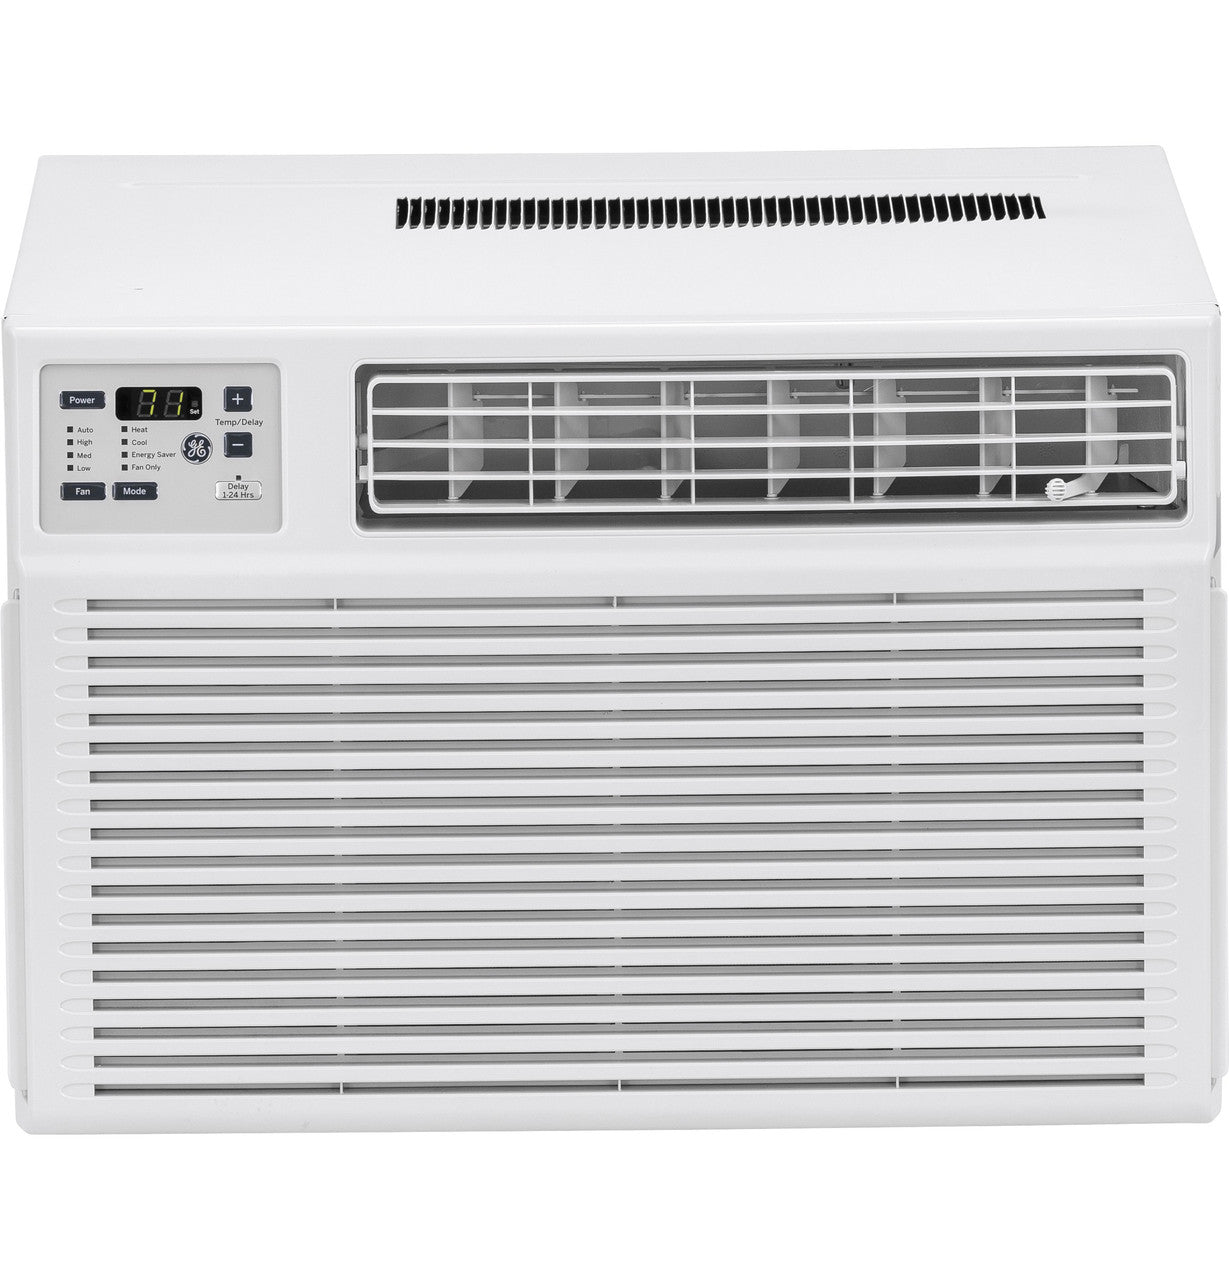 GE 18,000 BTU Heat/Cool Electronic Window Air Conditioner for Extra-Large Rooms up to 1000 sq. ft. (Refurbished)